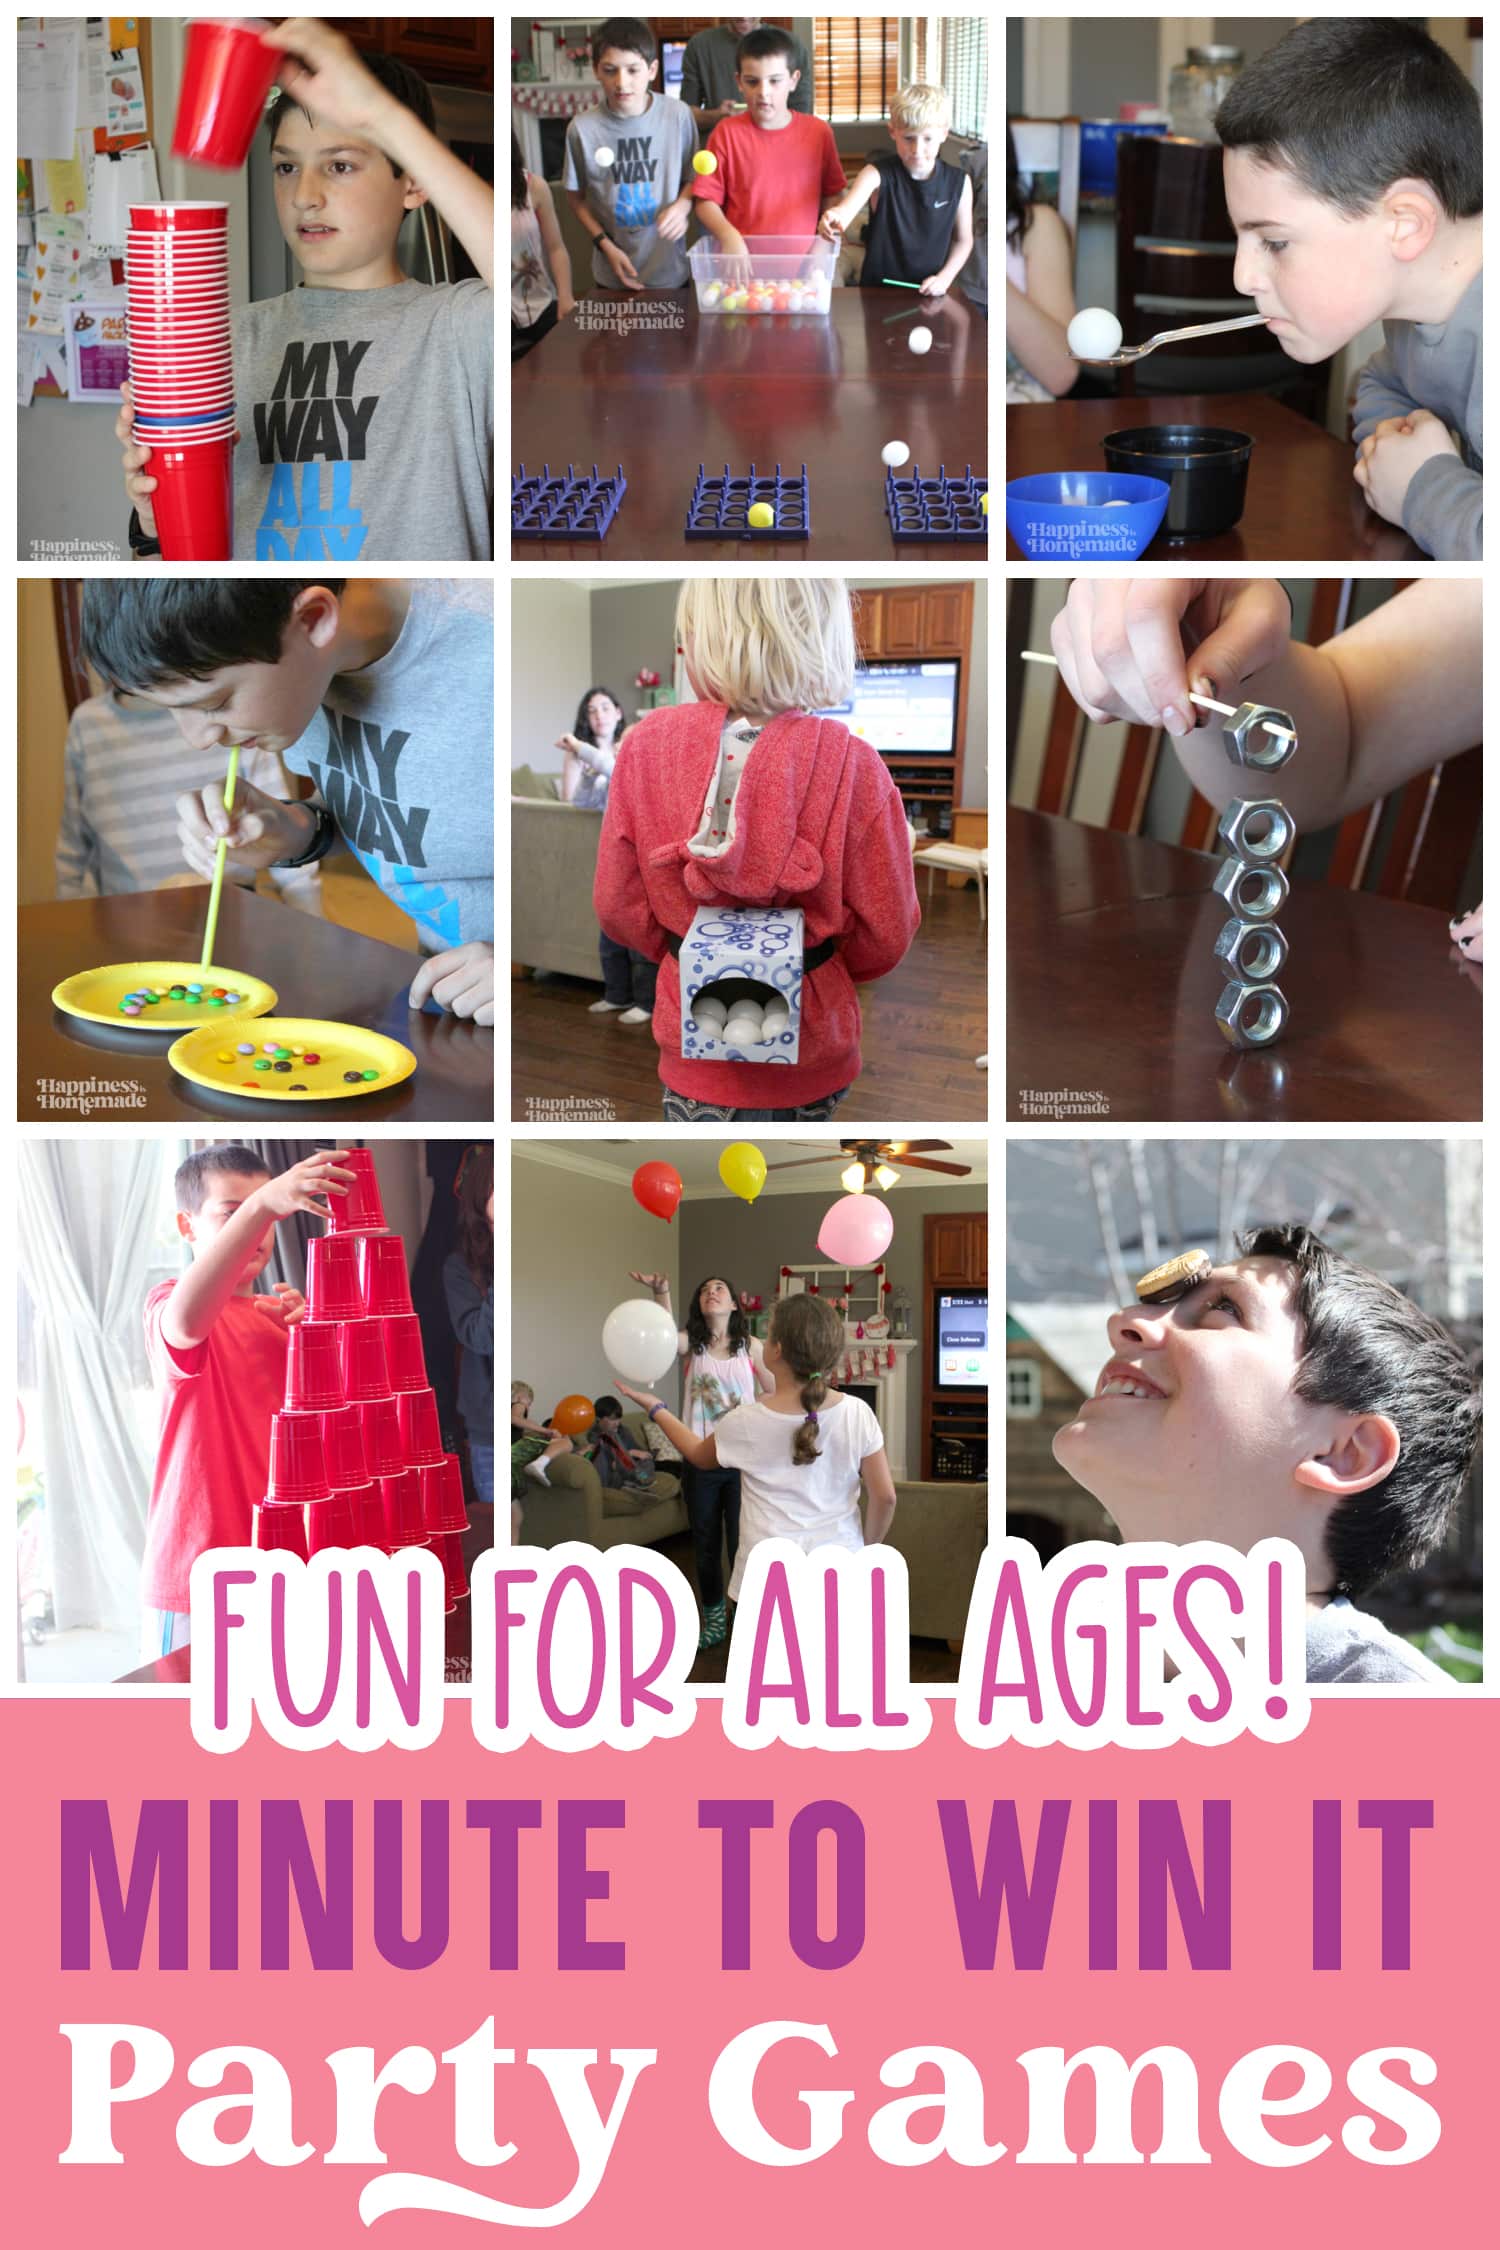 Party games and entertainment ideas for guests